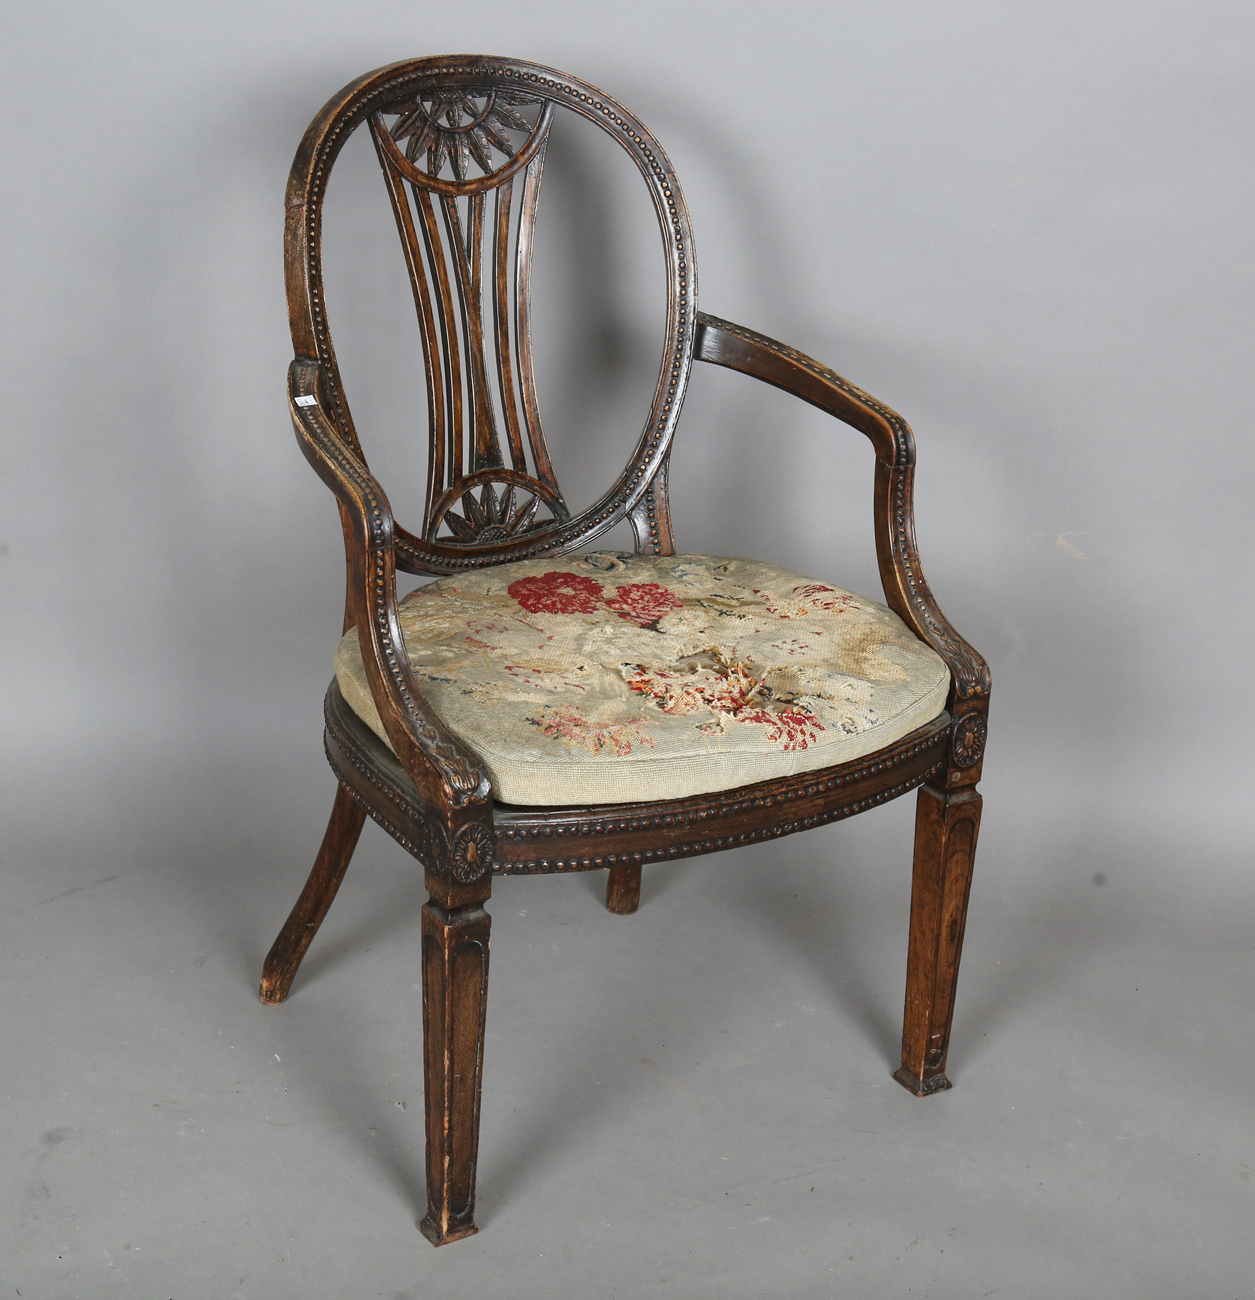 A late George III Neoclassical walnut framed elbow chair with a beaded frame and caned seat,